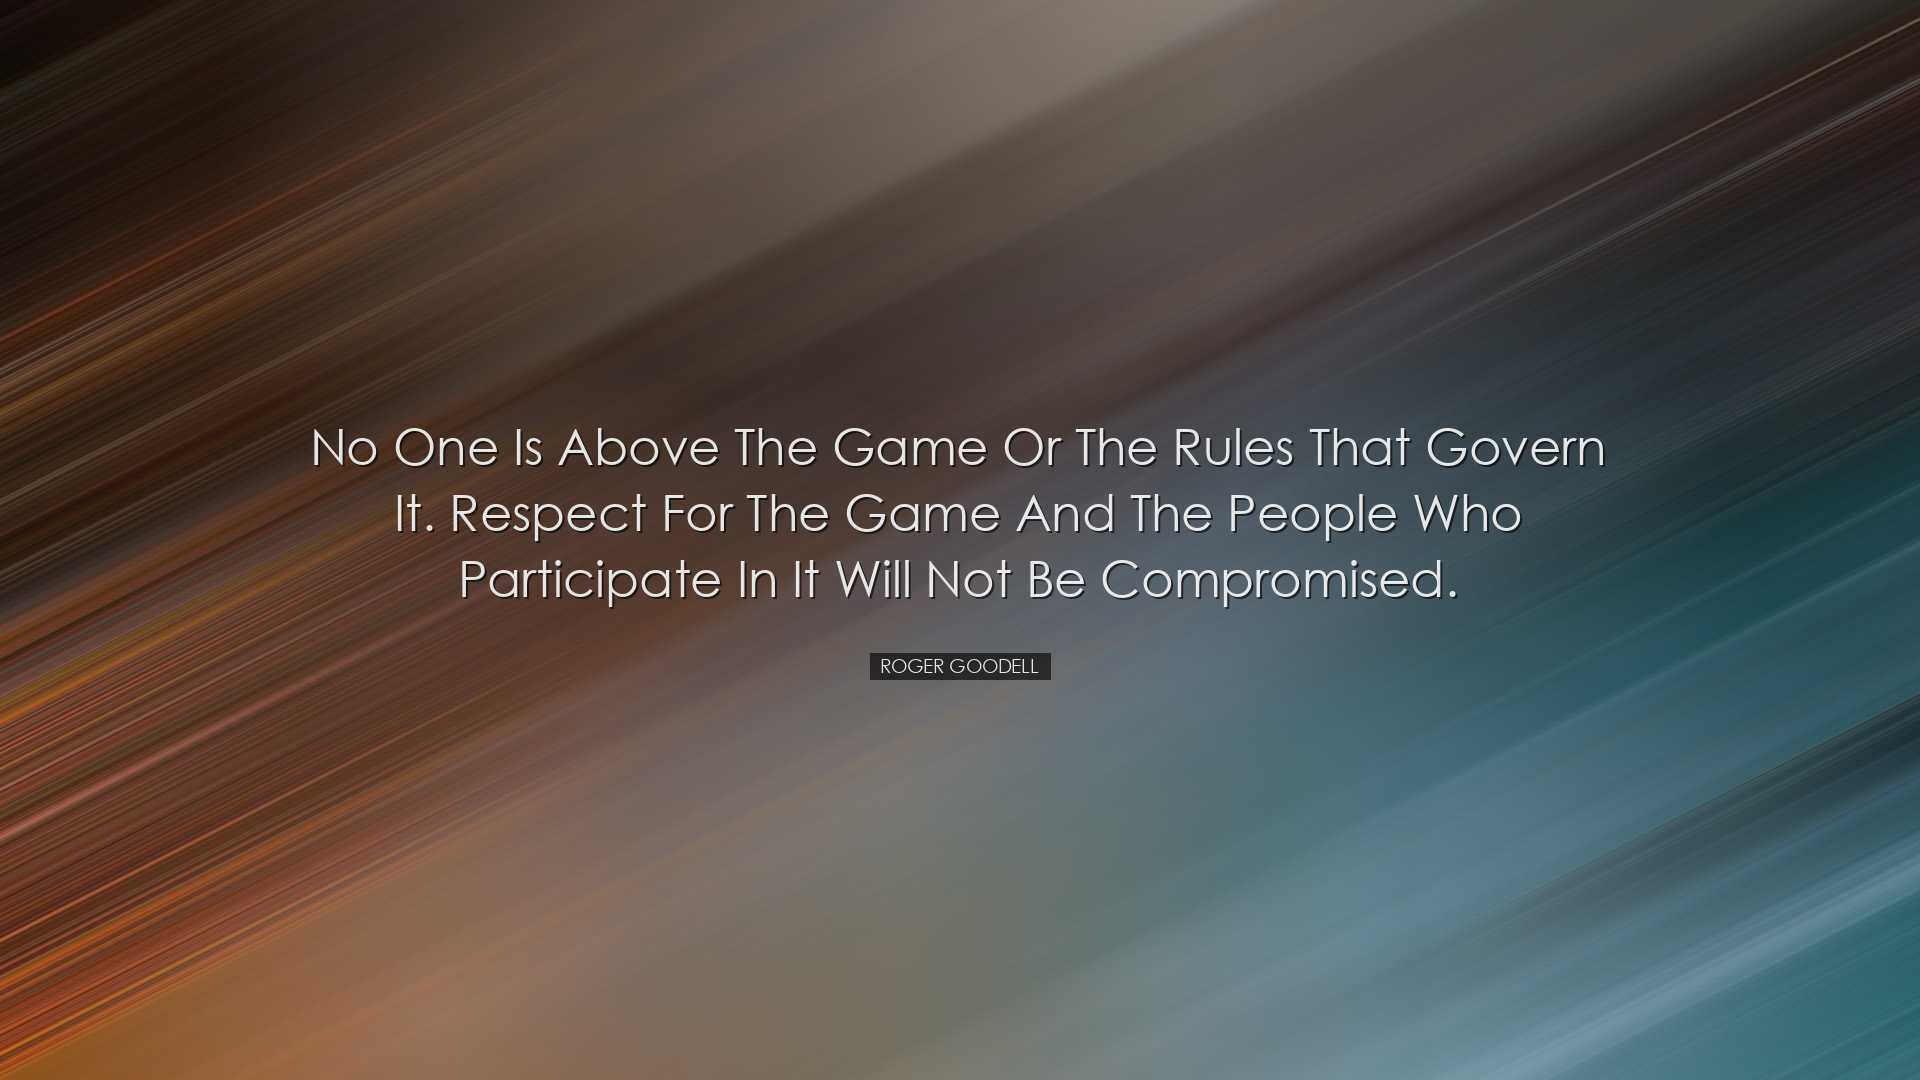 No one is above the game or the rules that govern it. Respect for